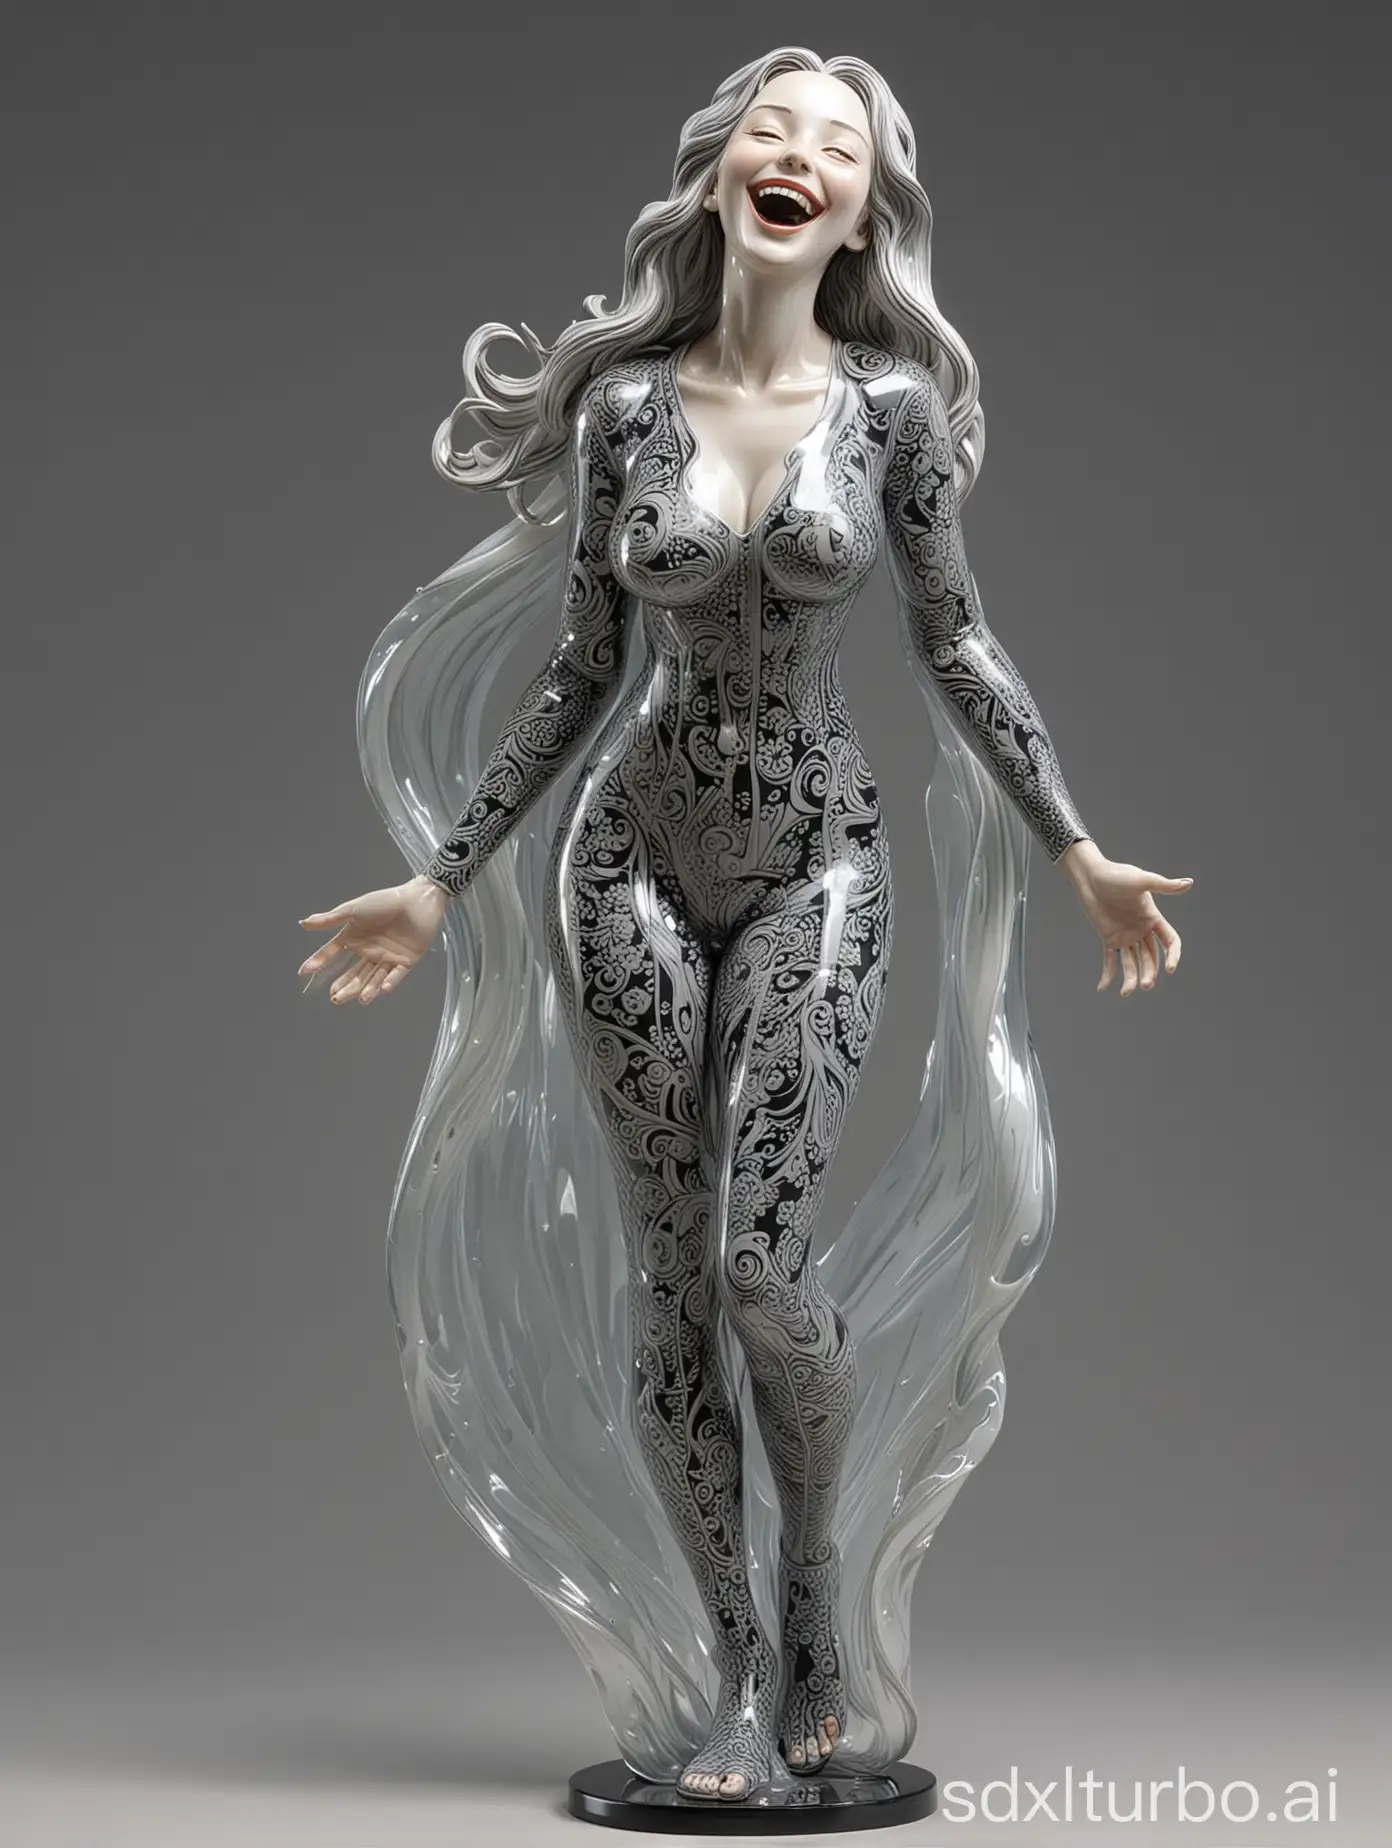 ceramics statue of an attractive woman,laughing, ((open eyes,full body,standing)) ，wrapped in glass,with white highlights, Long hair with S-shaped curve. Partially metallic, light refracts, solid black background, Succinctly summarized, in the style of James Jean and Moebius